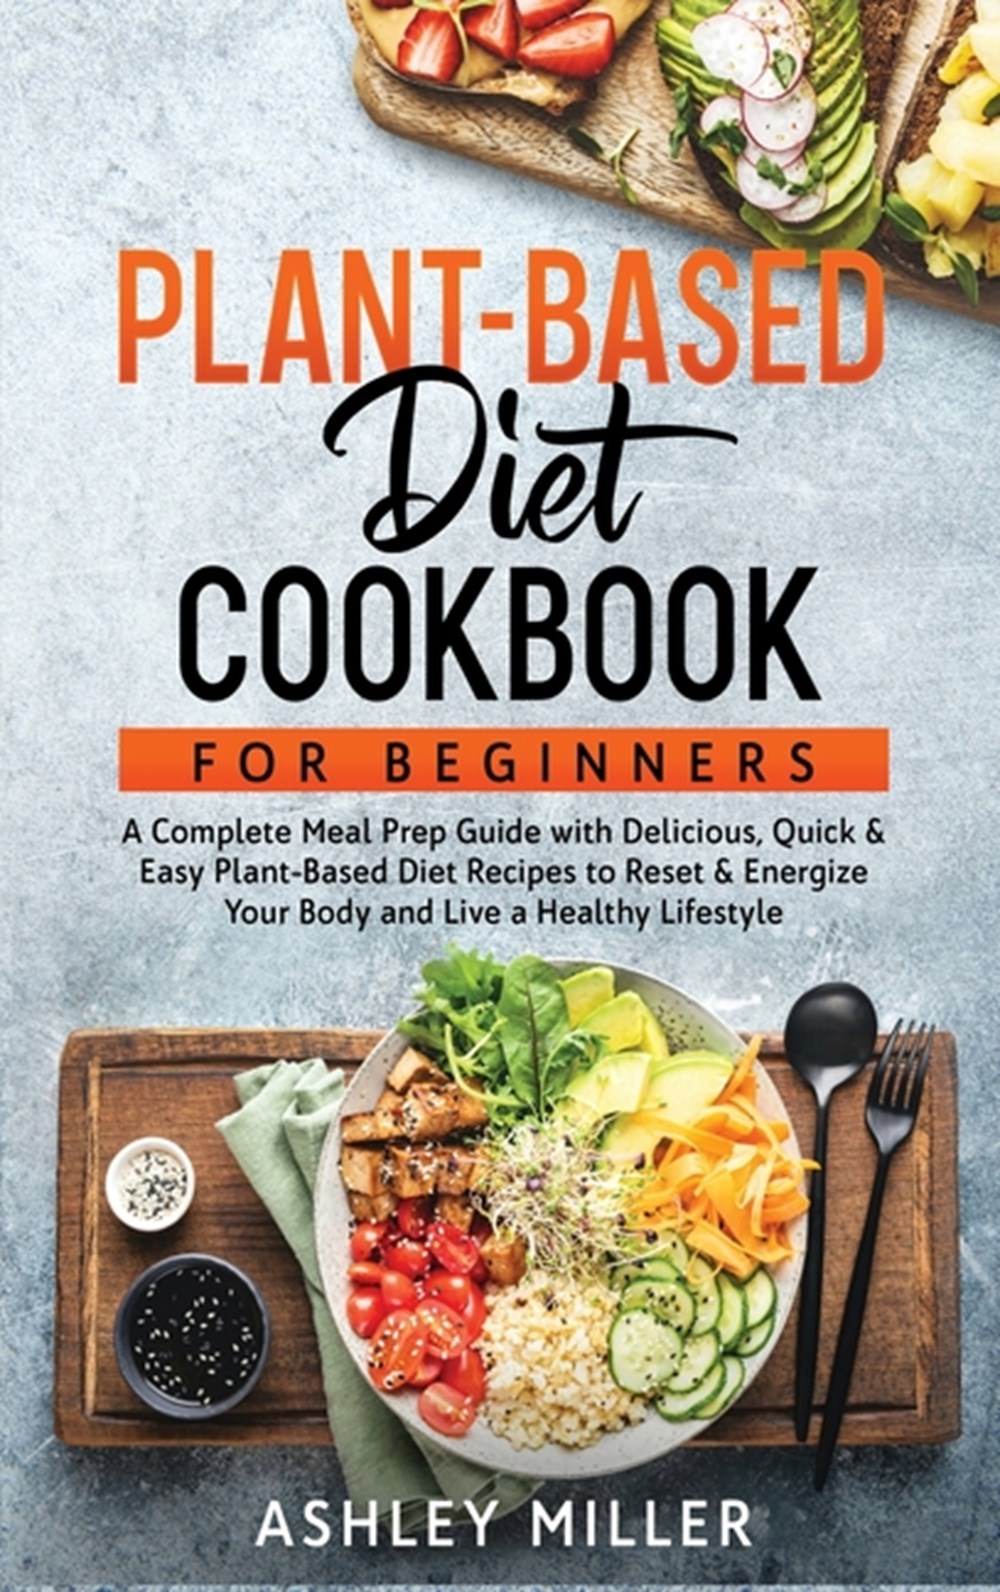 Buy Plant Based Diet Cookbook for Beginners: A Complete Meal Prep Guide ...